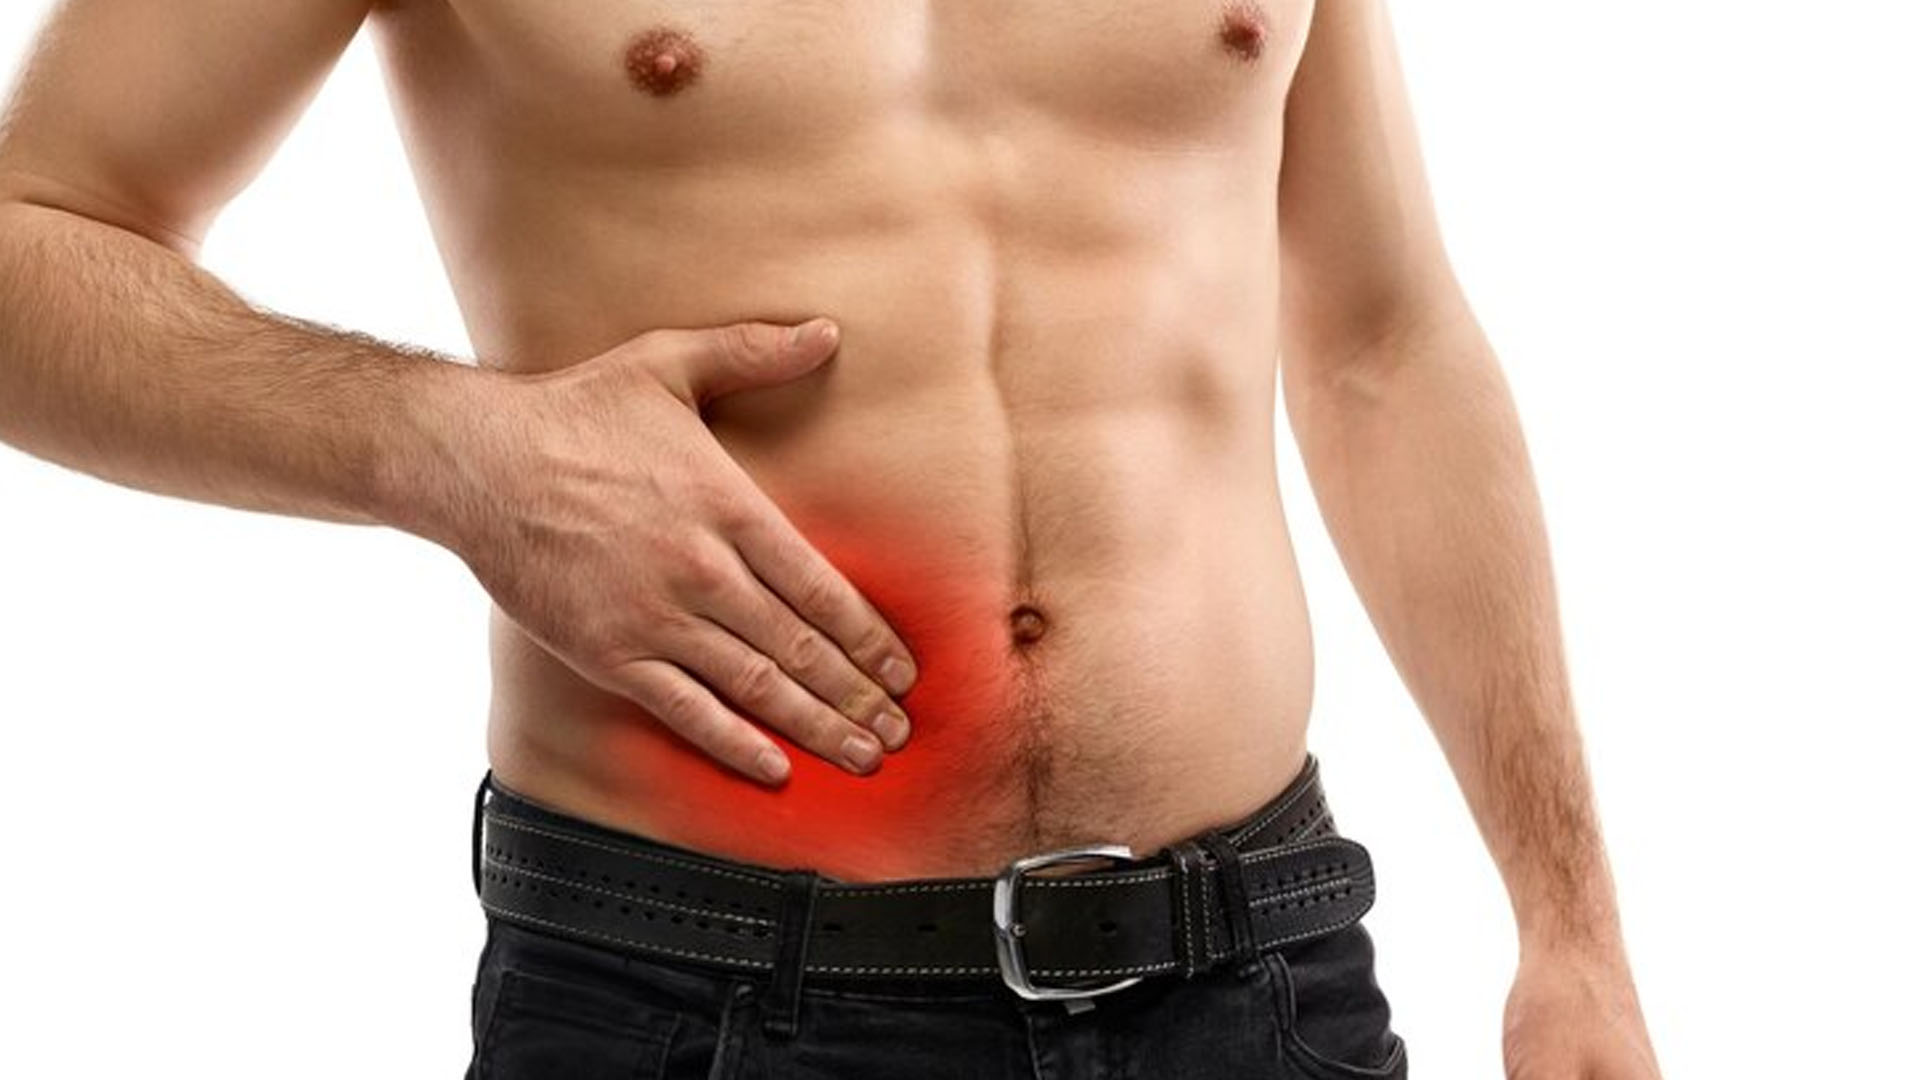 What are the Home Remedies for Navel Hernia?